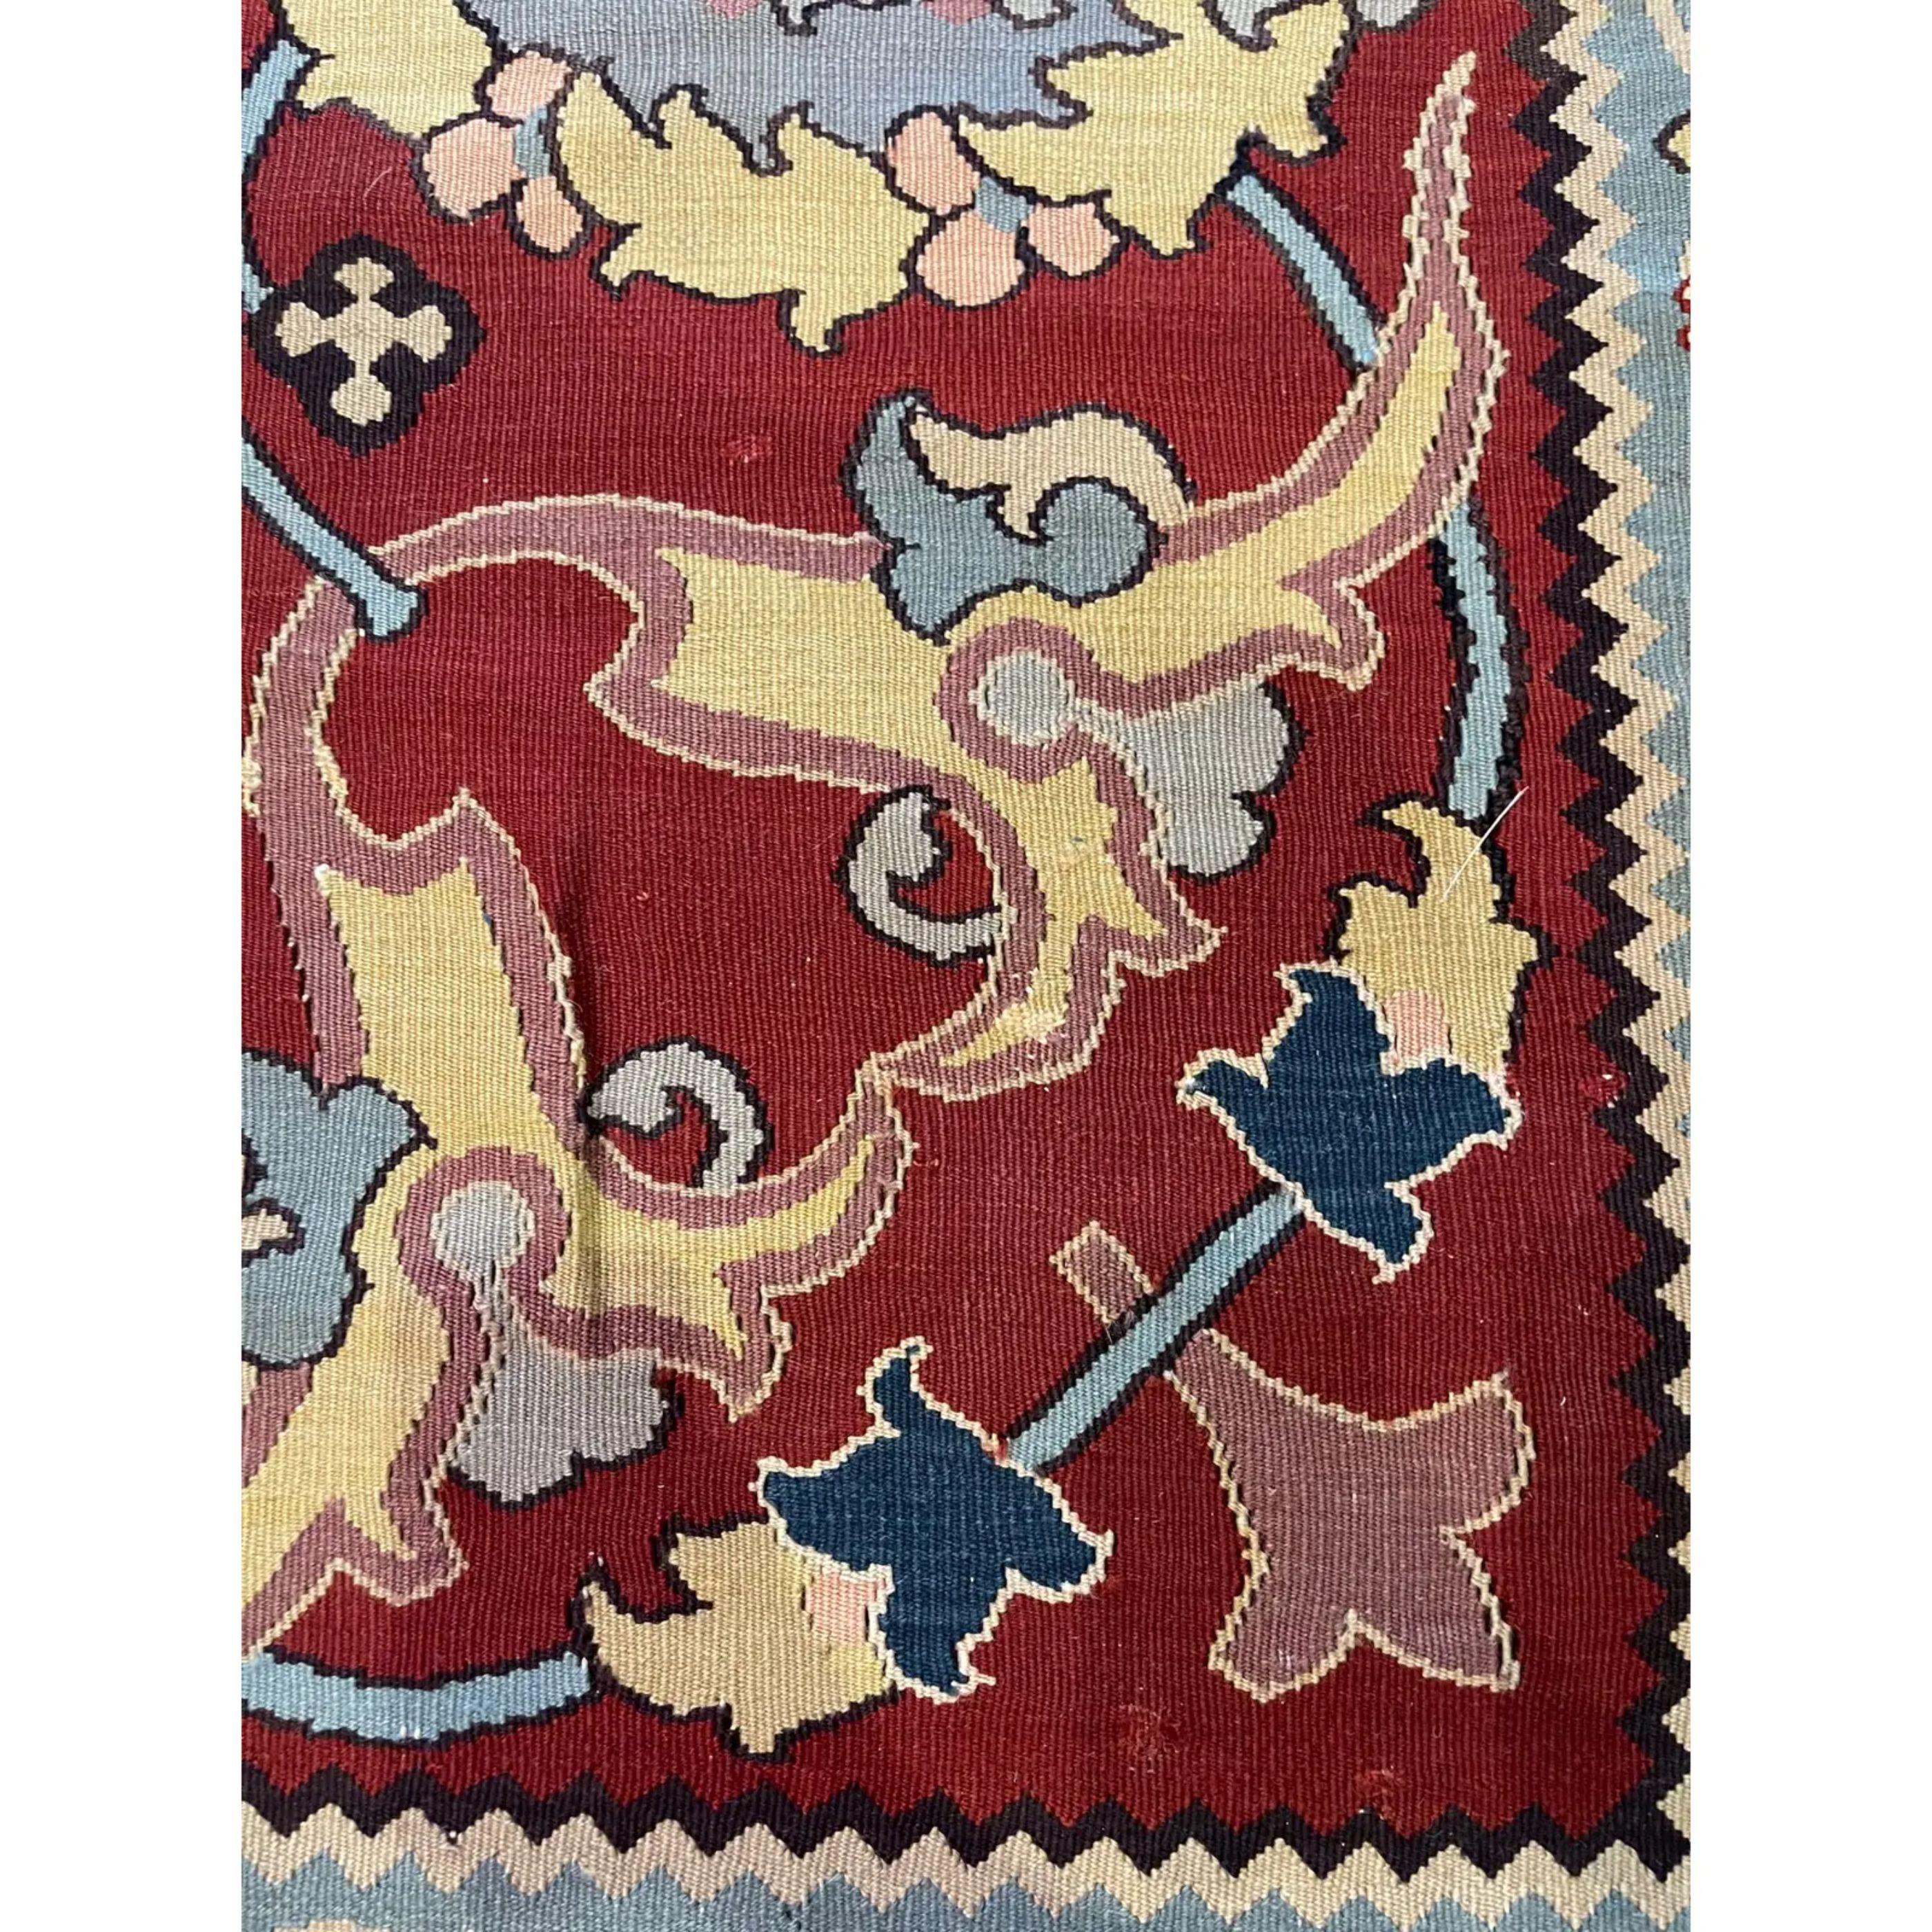 Antique Bessarabian Rugs / Kilims in both pile and tapestry weaving technique are some of the more beautiful carpets to have been produced in Europe. Many of the Bessarabian Kilims were woven around the mid to late 19th century, though some do date